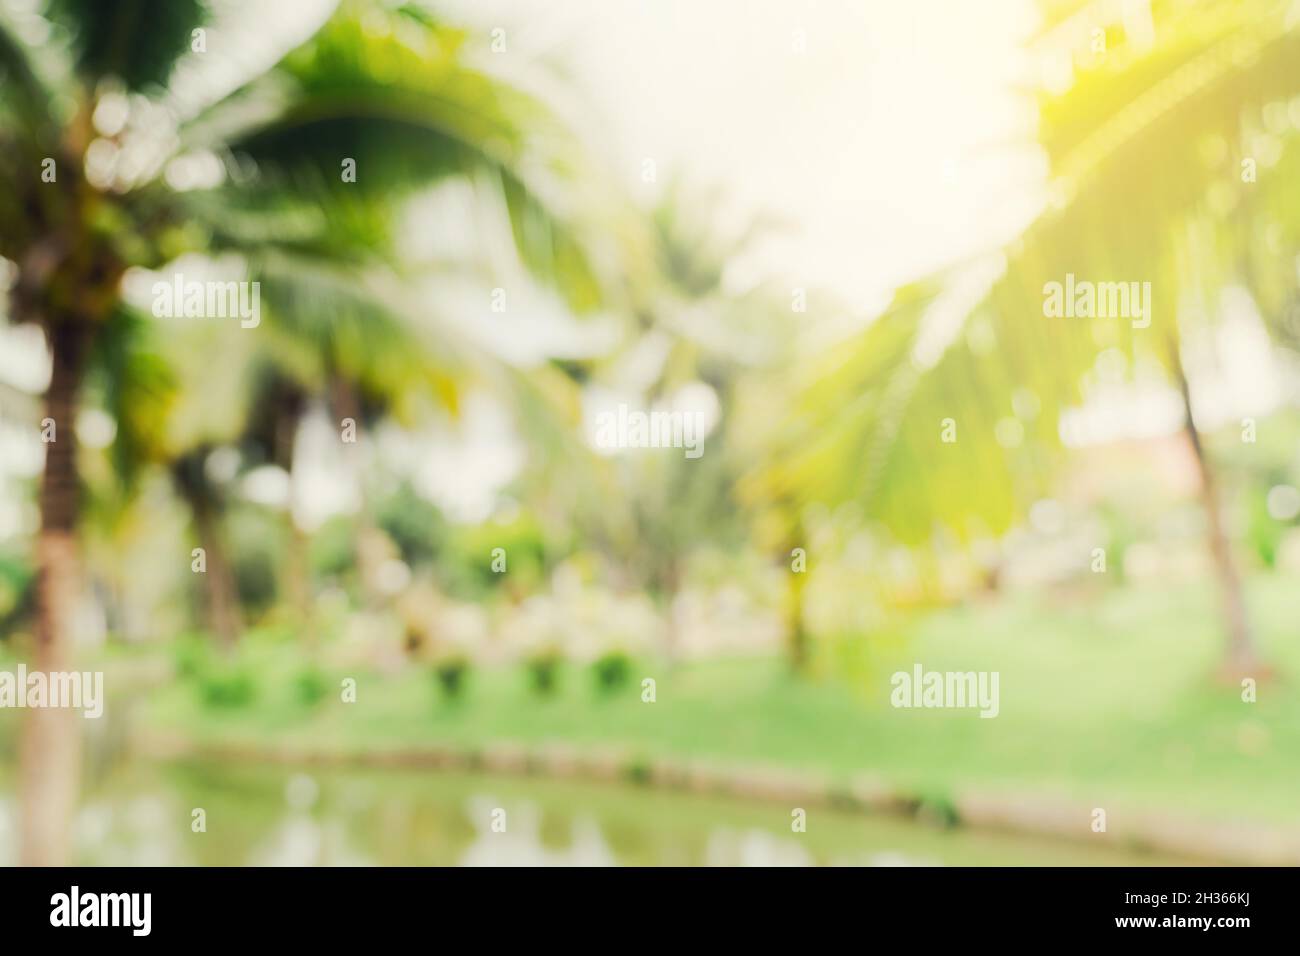 defocused bokeh and blur background of garden trees in sunlight with vintage toned. Stock Photo